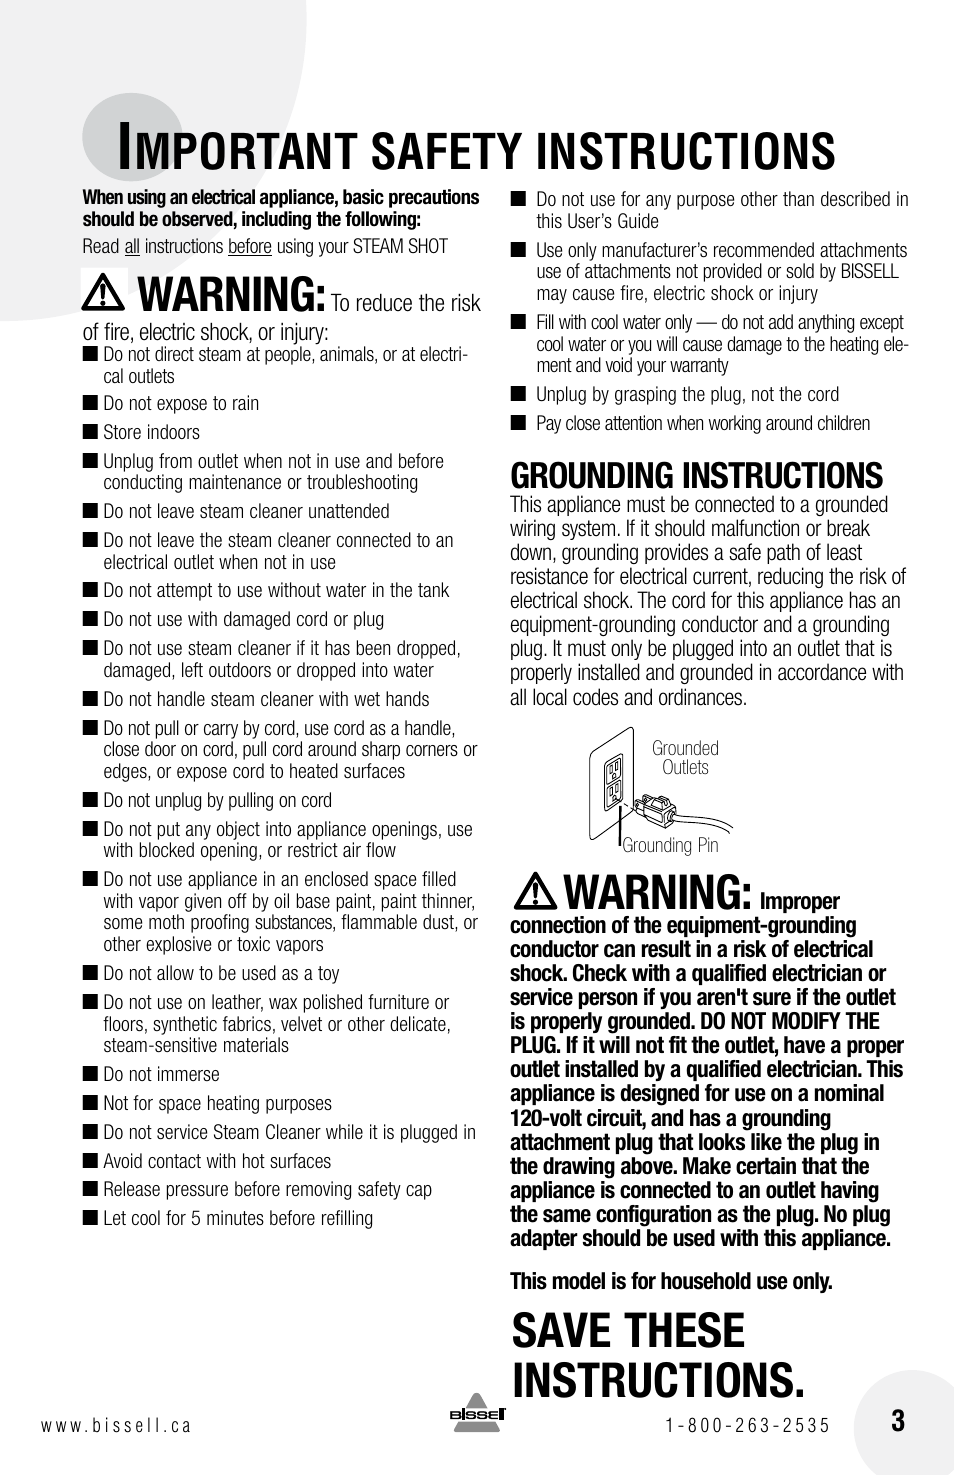 Mportant safety instructions, Warning, Save these instructions | Grounding instructions | Bissell STEAM SHOT 39N7 User Manual | Page 3 / 12